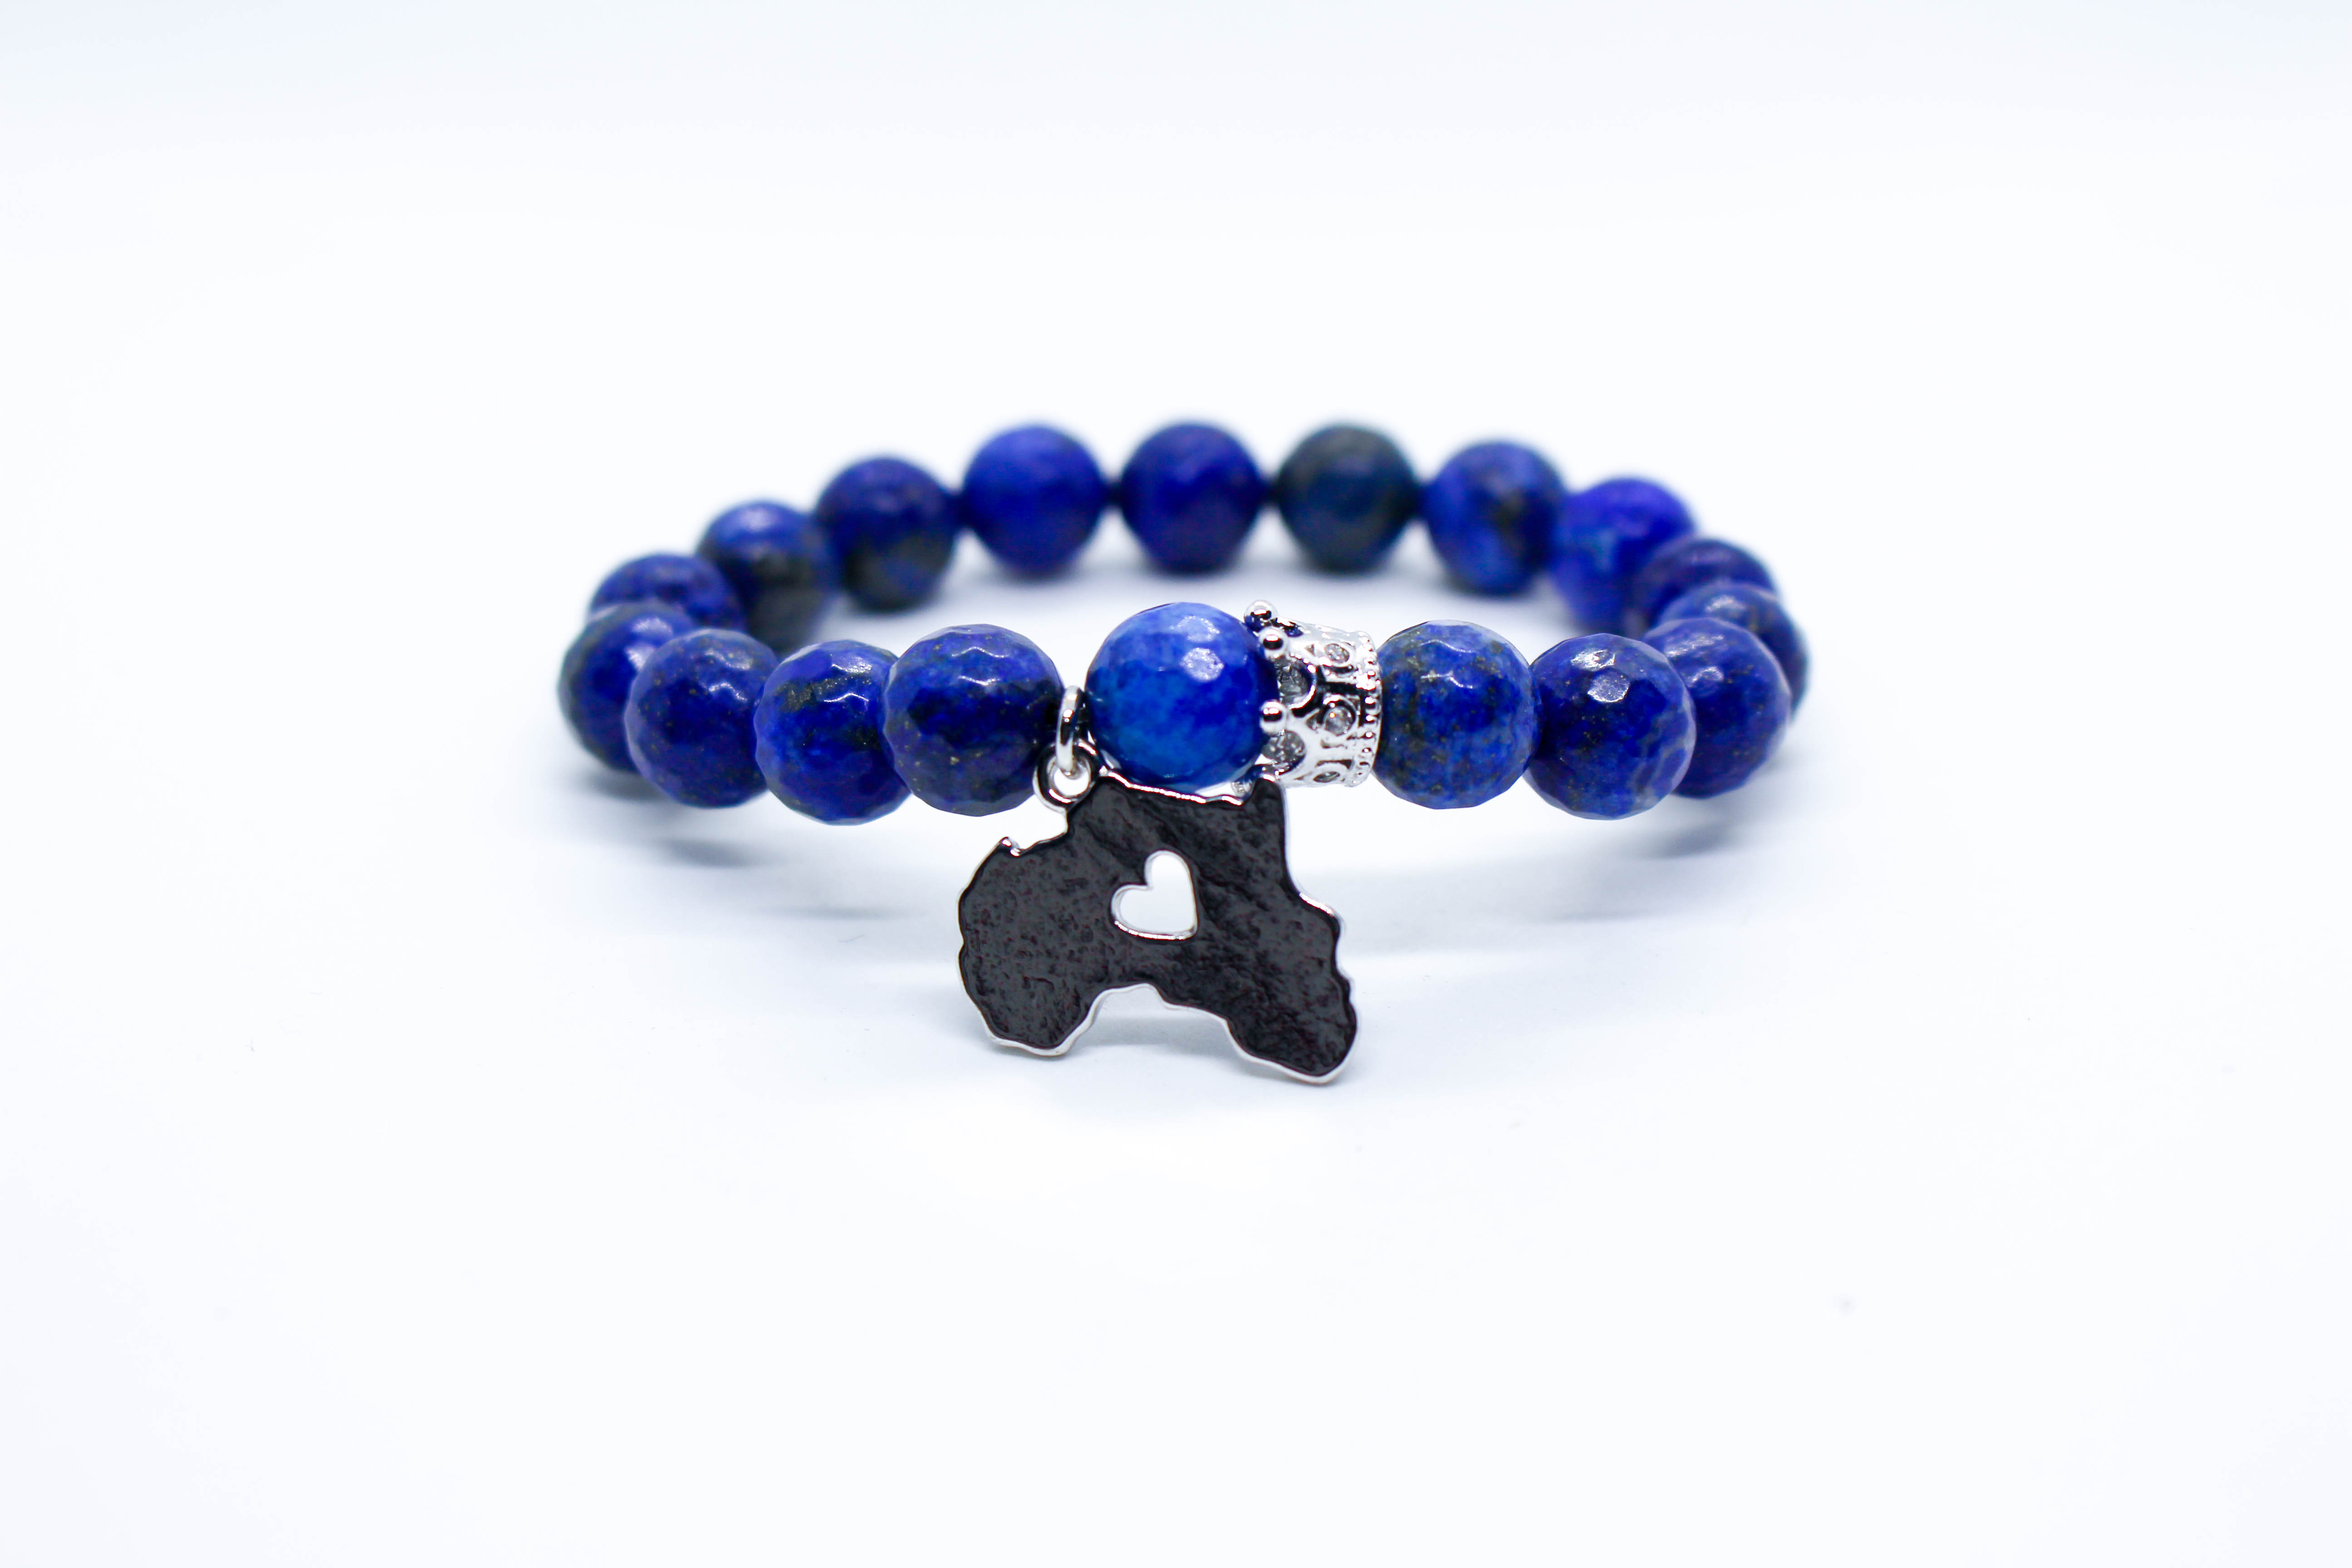 Amateur Wife Bbc Gangbang - Heart of Africa Crowned Bracelet (Faceted Lapis Lazuli Crystal) 10mm Beads  | RockYourLocs